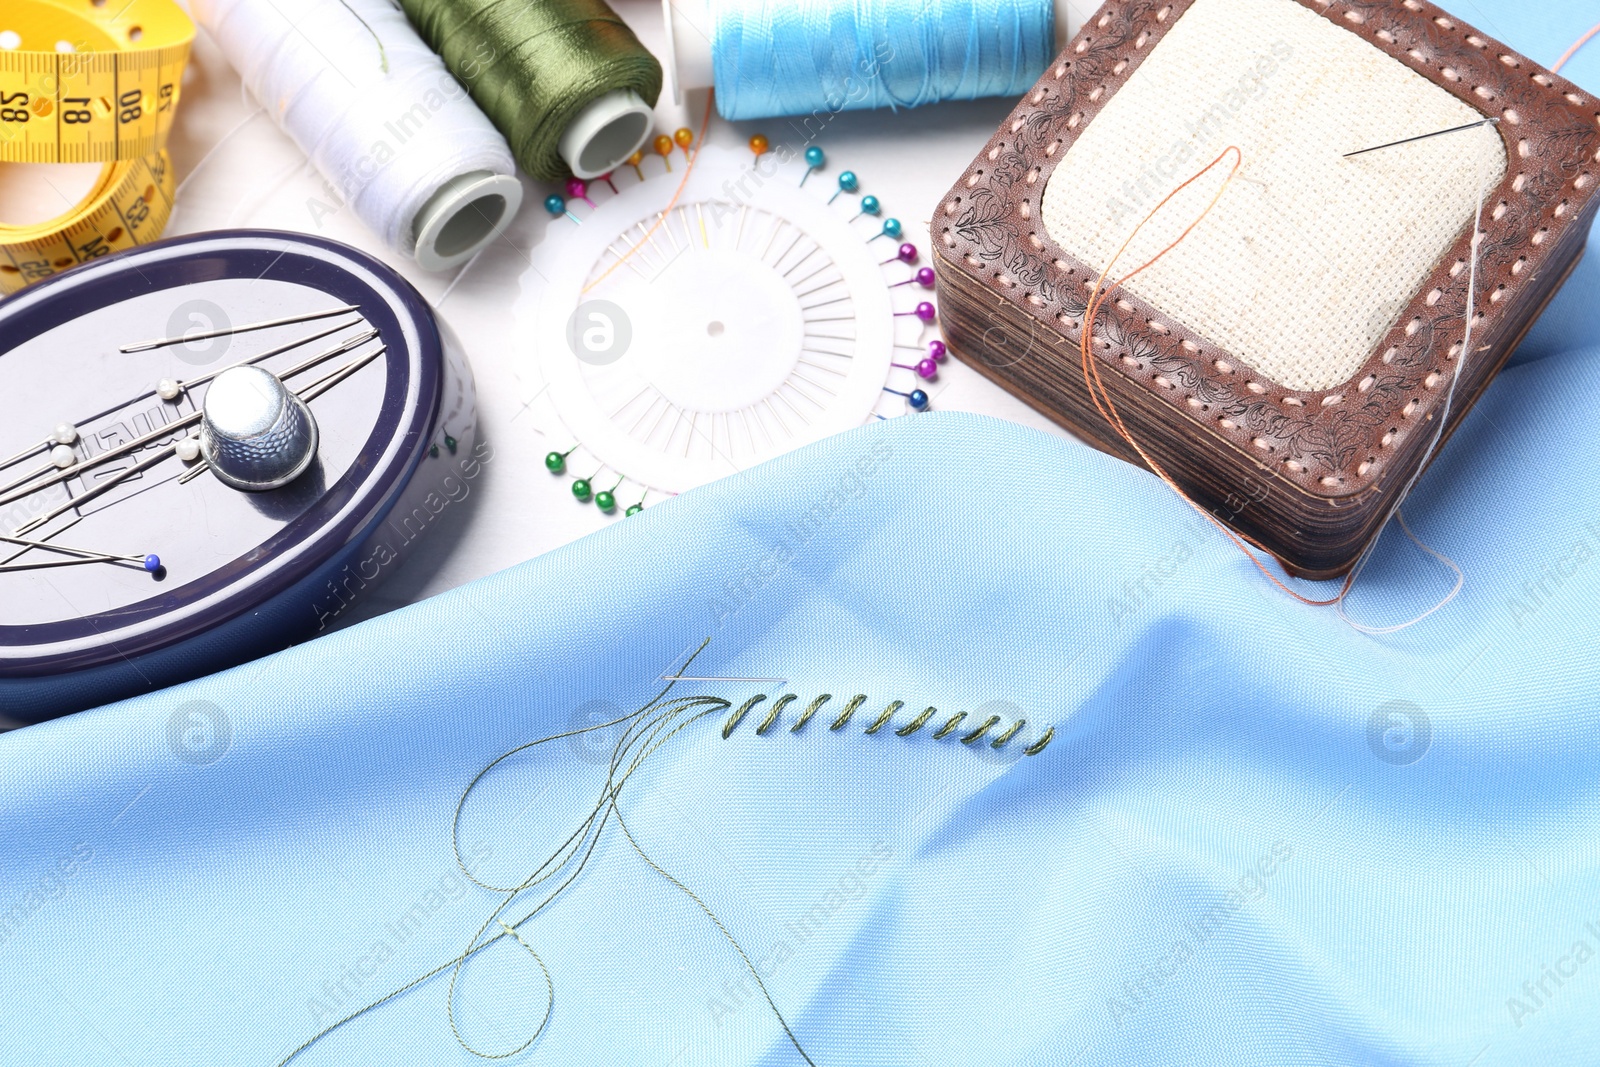 Photo of Light blue cloth with needle, thread and stitches near sewing tools on table, above view